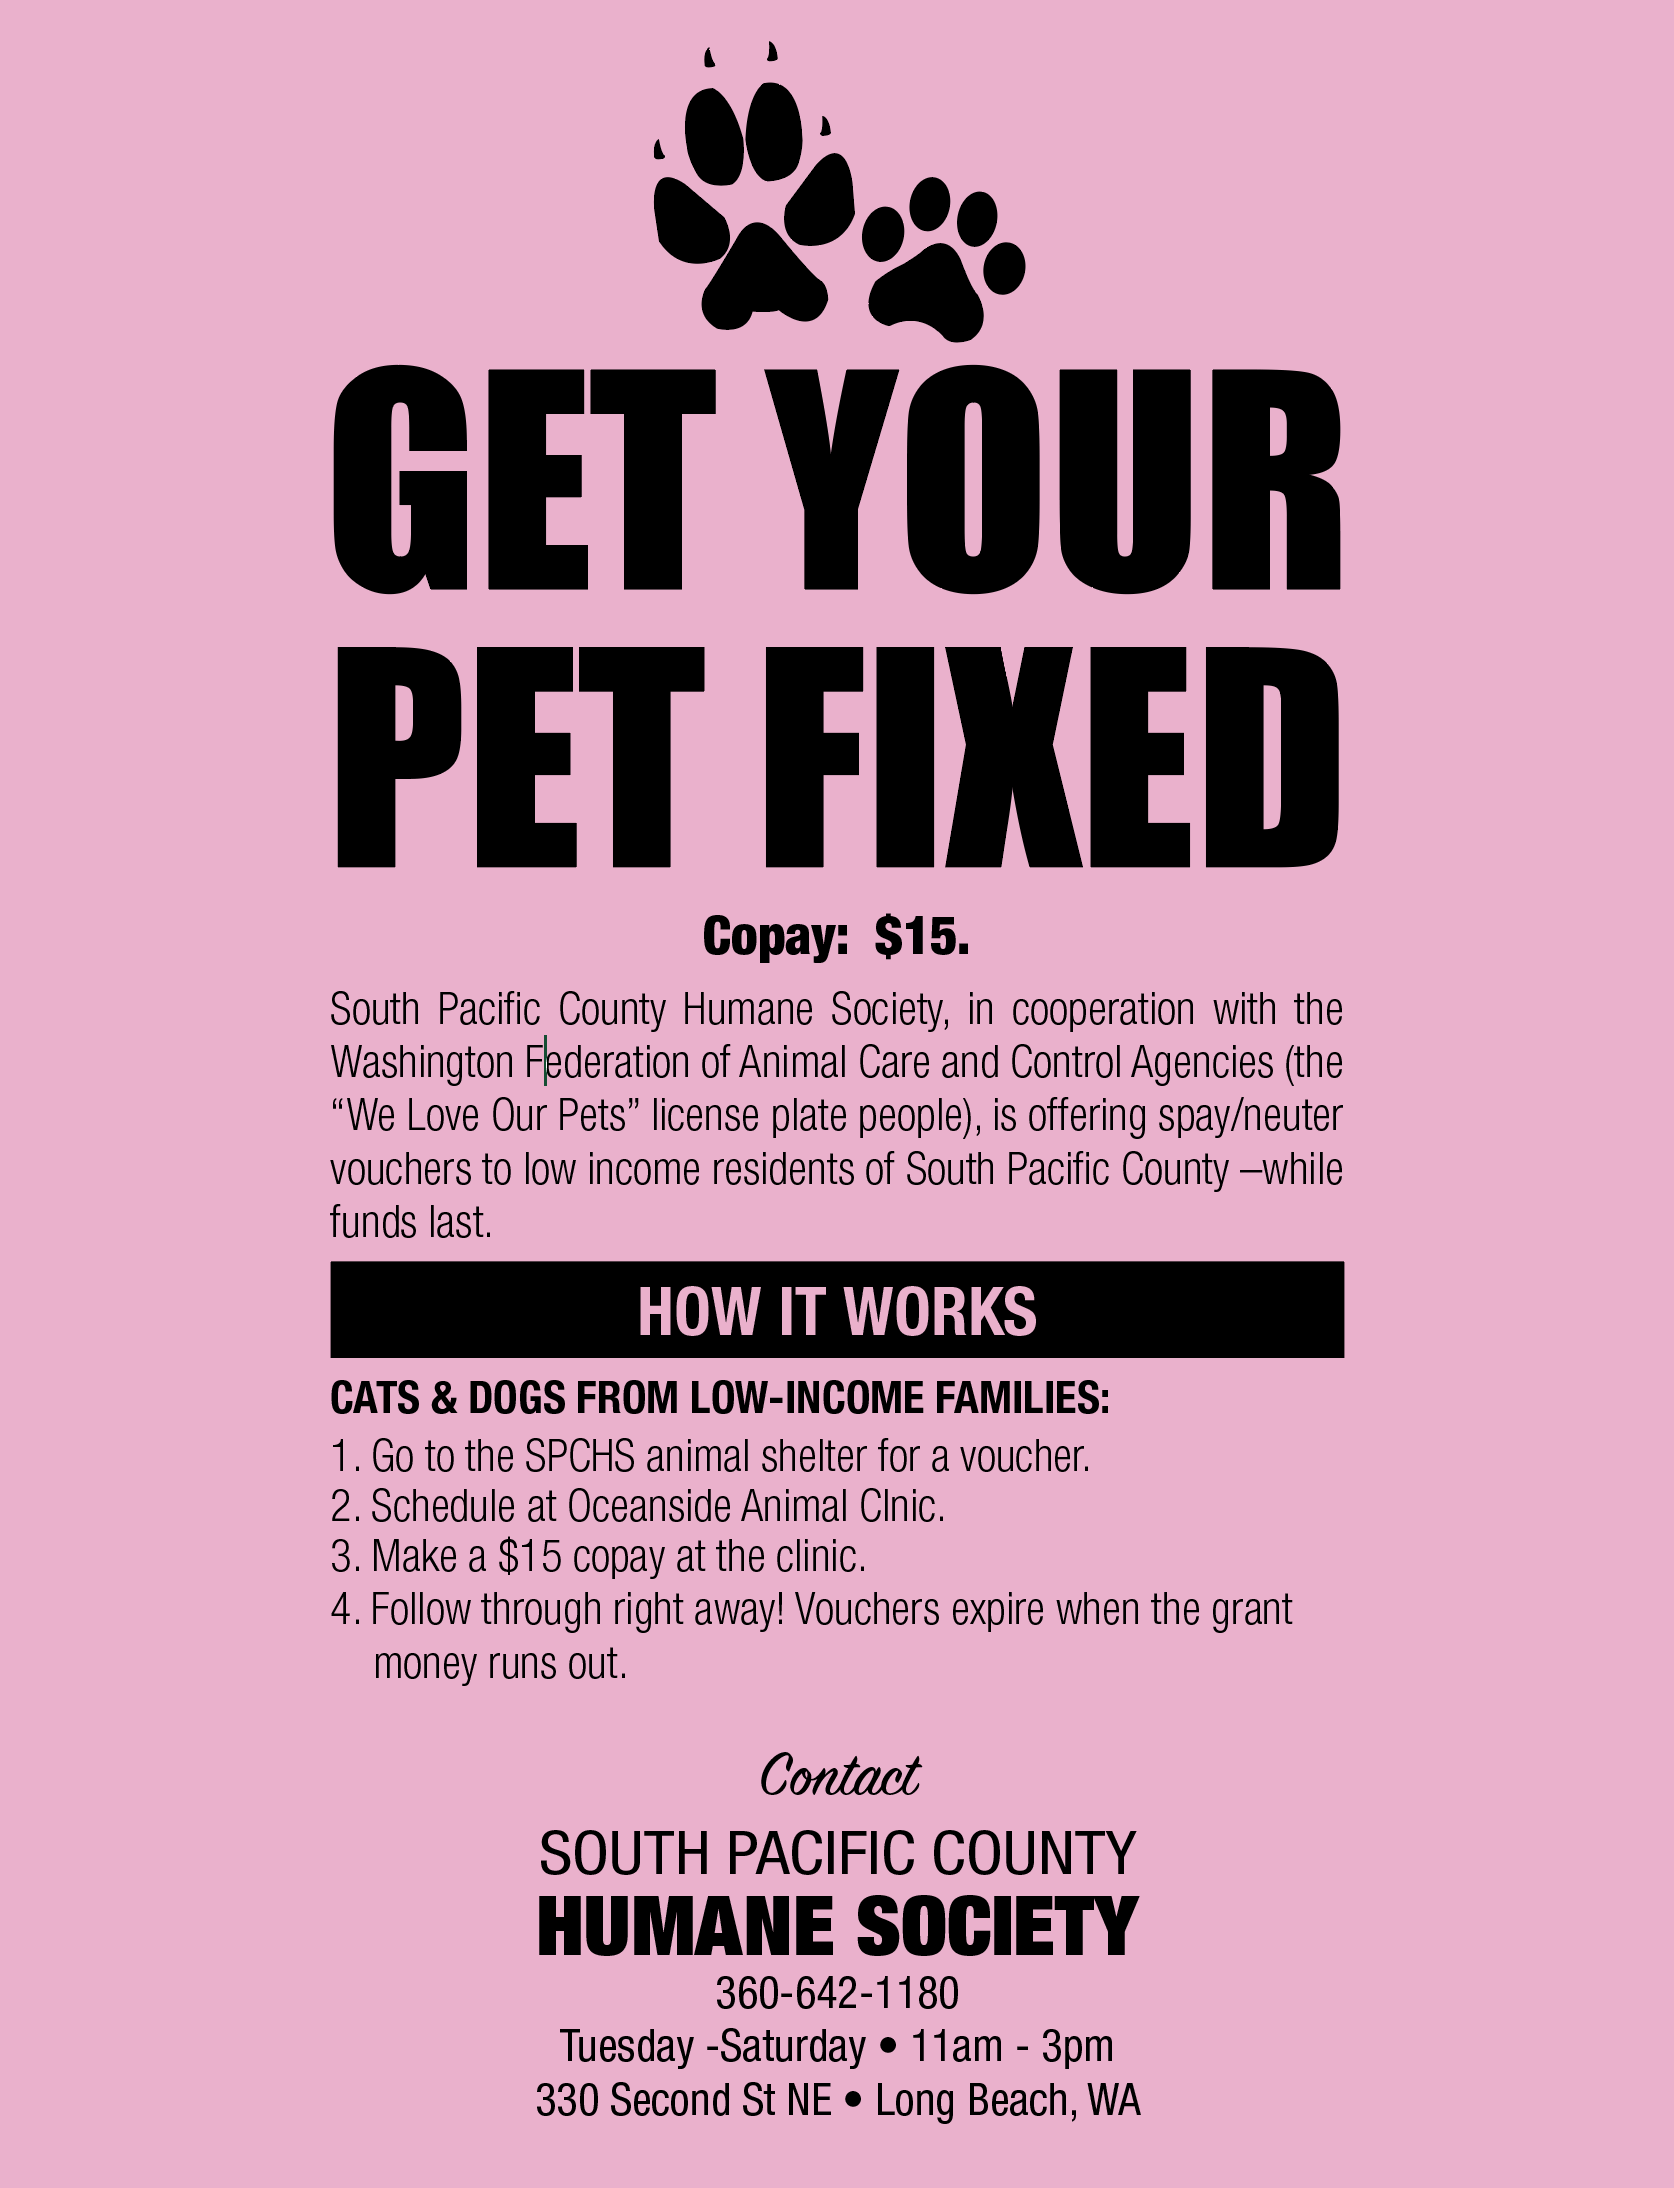 Get your pet fixed